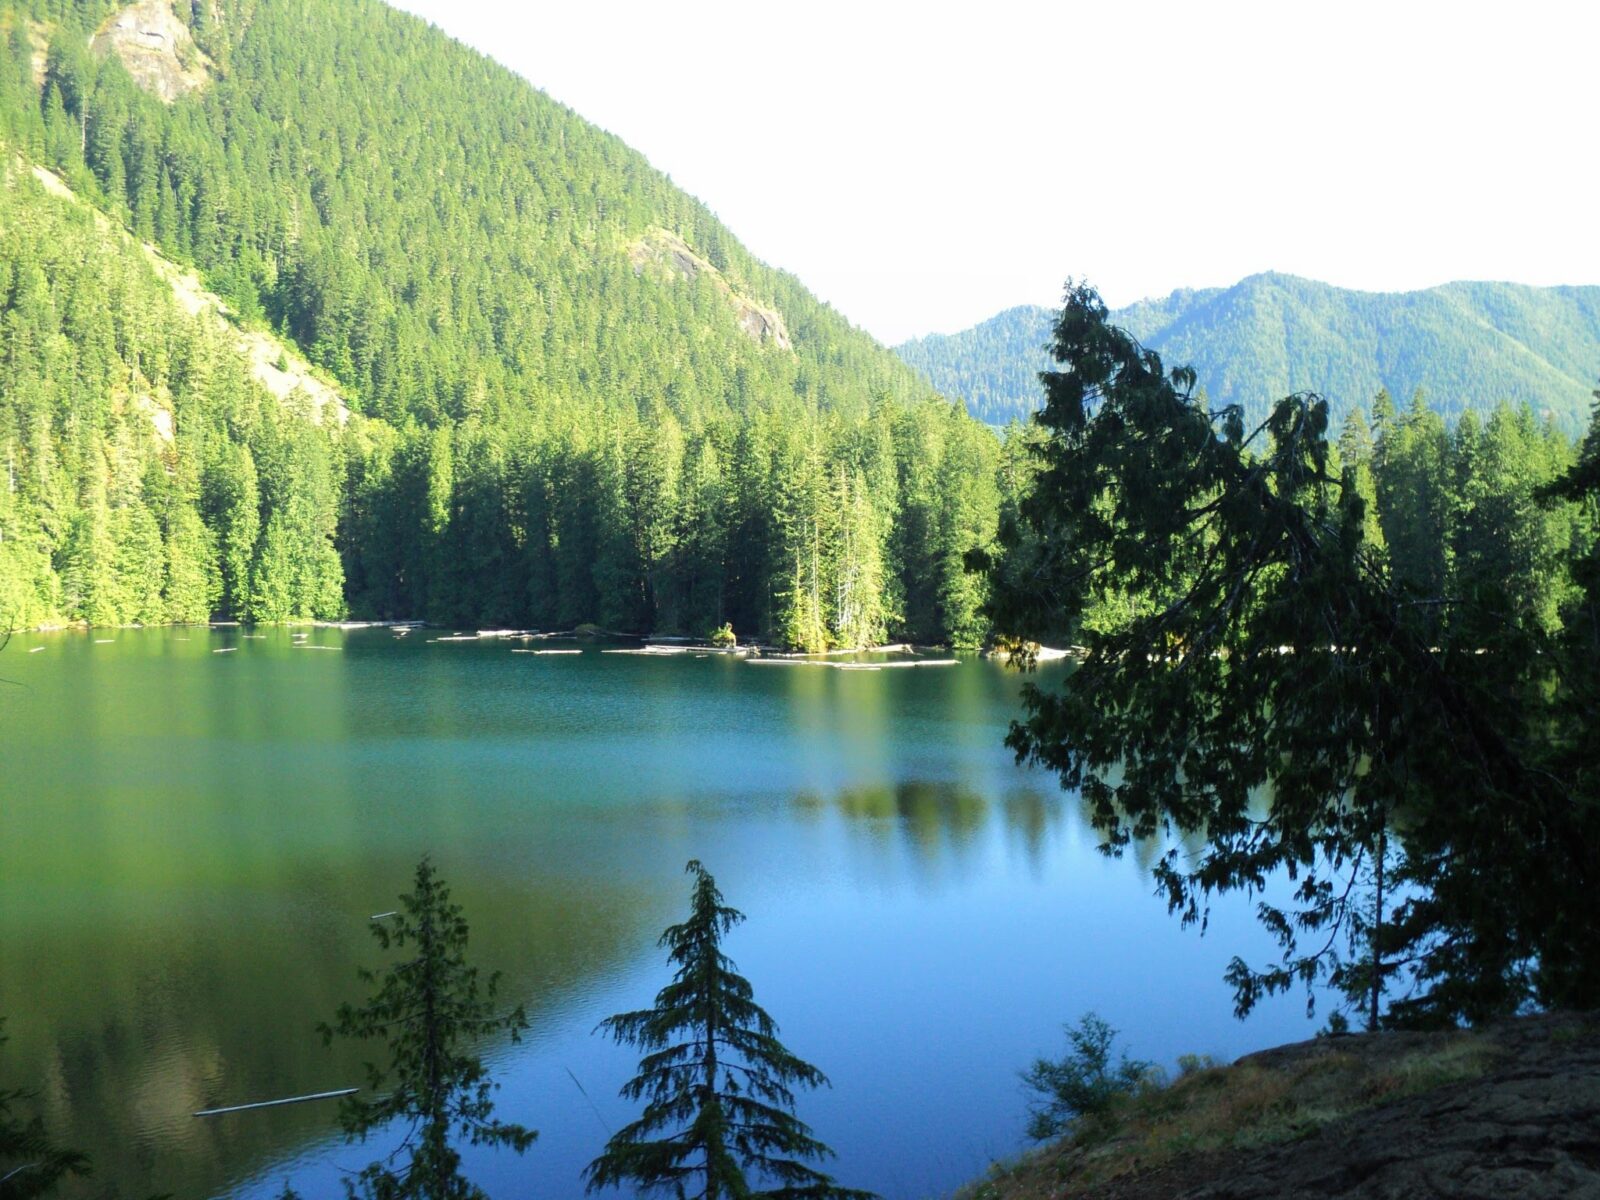 A calm alpine lake on a sunny day surrounded by evergreen trees.